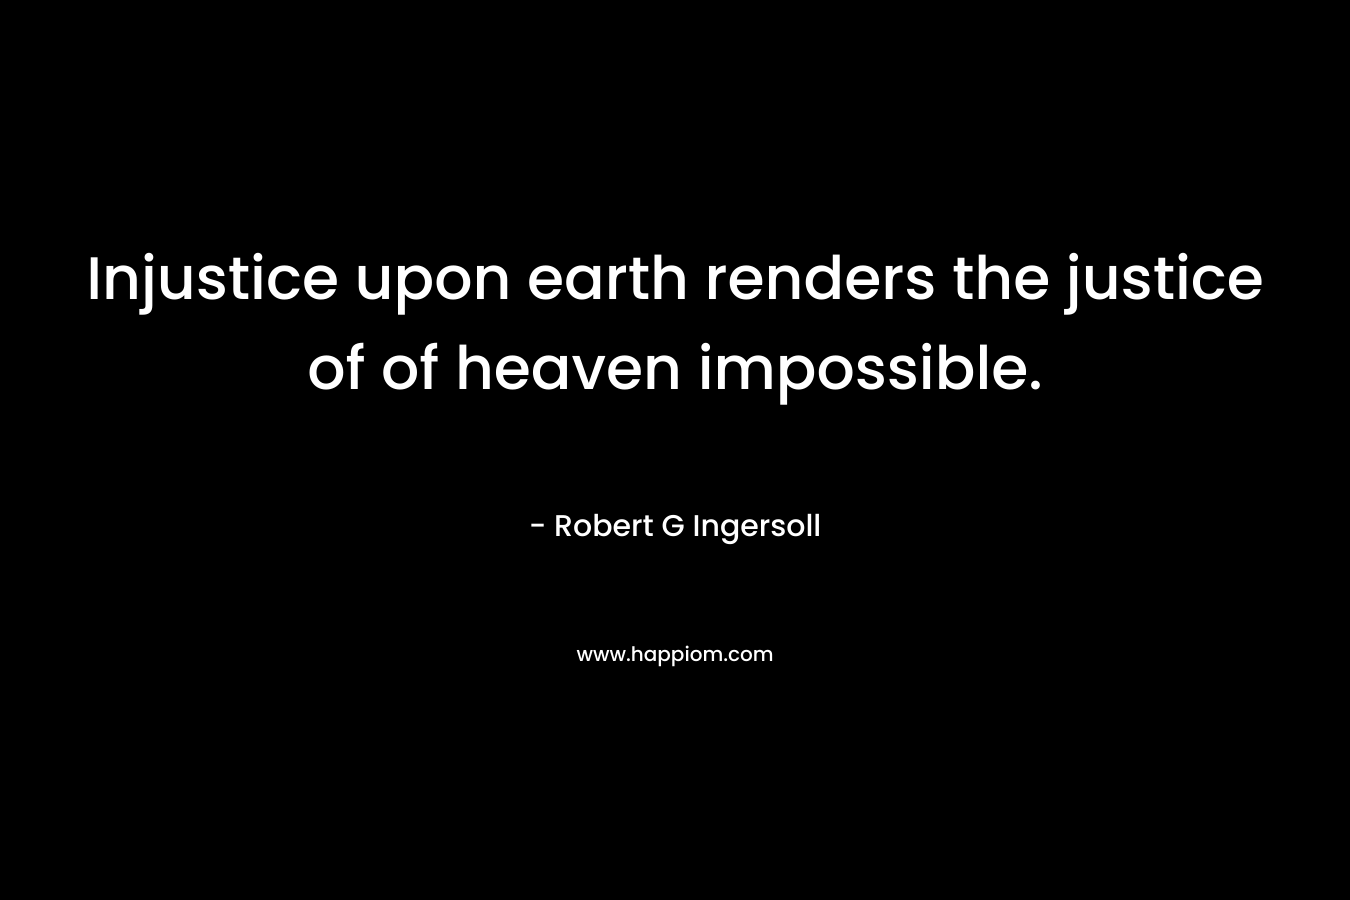 Injustice upon earth renders the justice of of heaven impossible. – Robert G Ingersoll